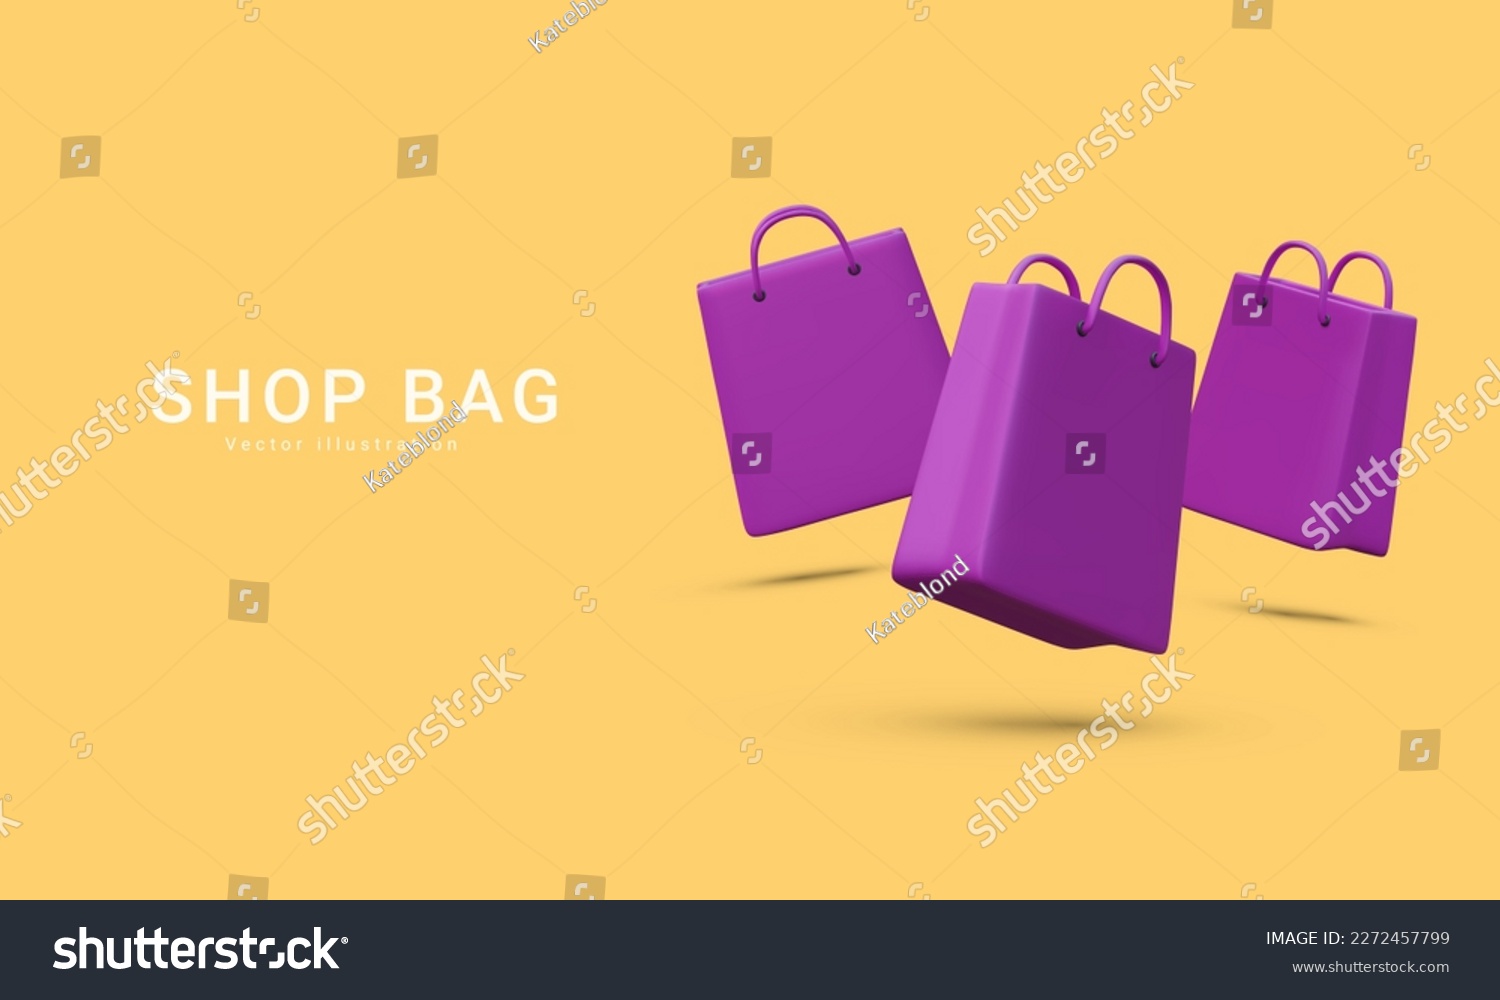 3D Vector illustration
Banner for online shopping with 3d realistic gift bags. Vector illustration #2272457799